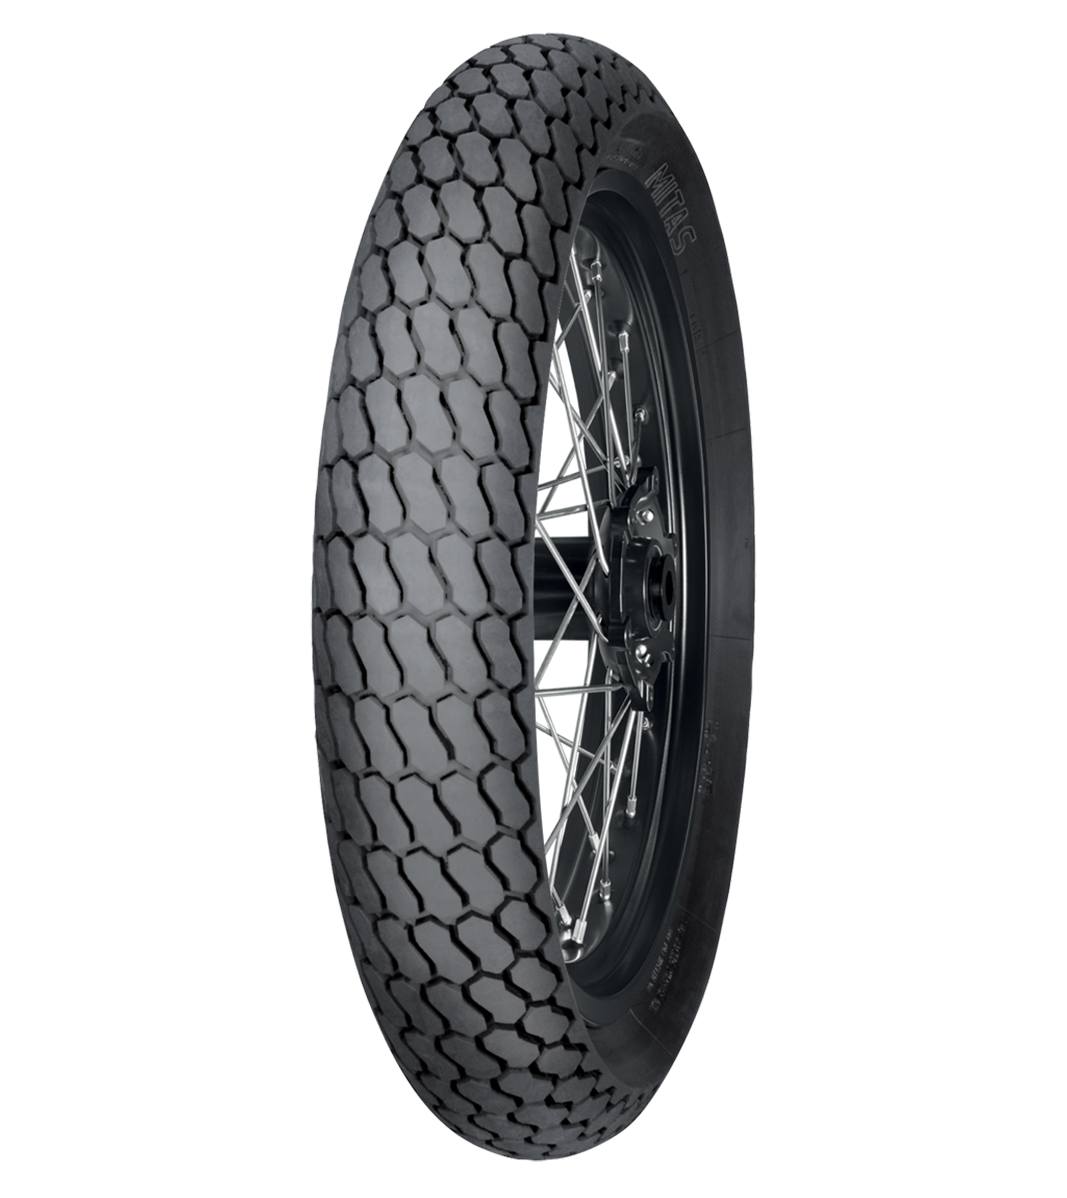 Mitas H-18 FLAT TRACK 130/80-19 (27x7-19) Flat Track Off-Road NHS 2 Green Tube Front Tire, 223408, 130/80-19, Flat Track, Front, H-18 Flat Track, Off-Road, Tires - Imported and distributed in North & South America by Lindeco Genuine Powersports - Premier Powersports Equipment and Accessories for Motorcycle Enthusiasts, Professional Riders and Dealers.